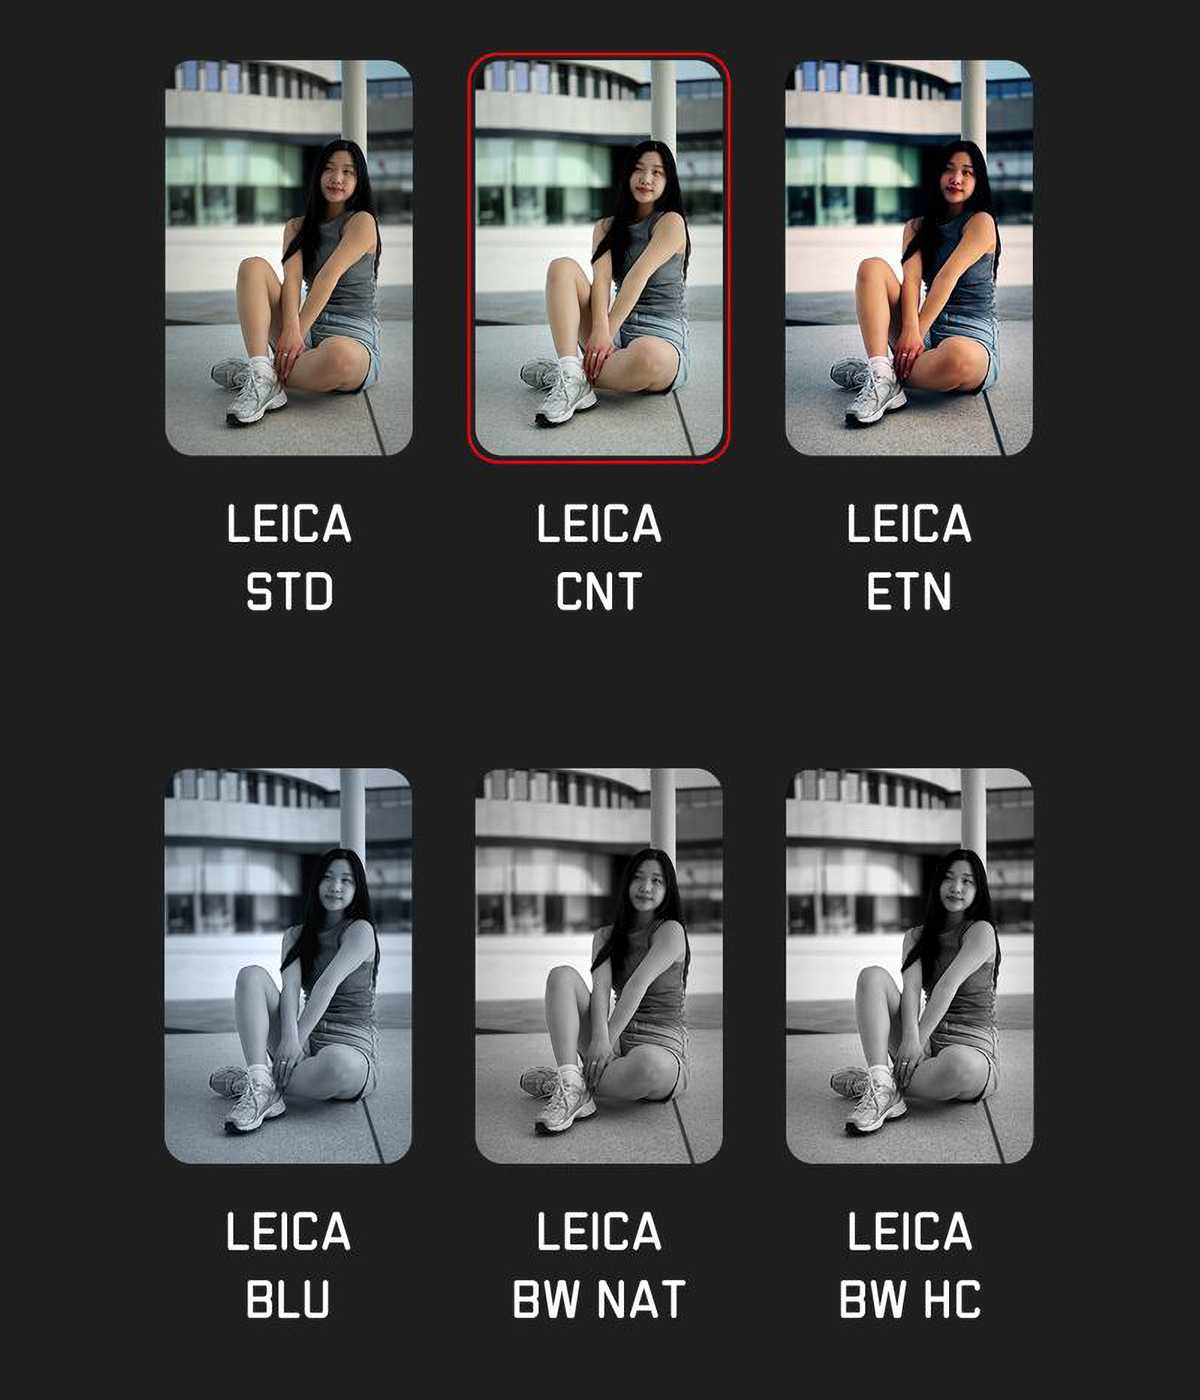 Leica LUXの画像処理エンジン